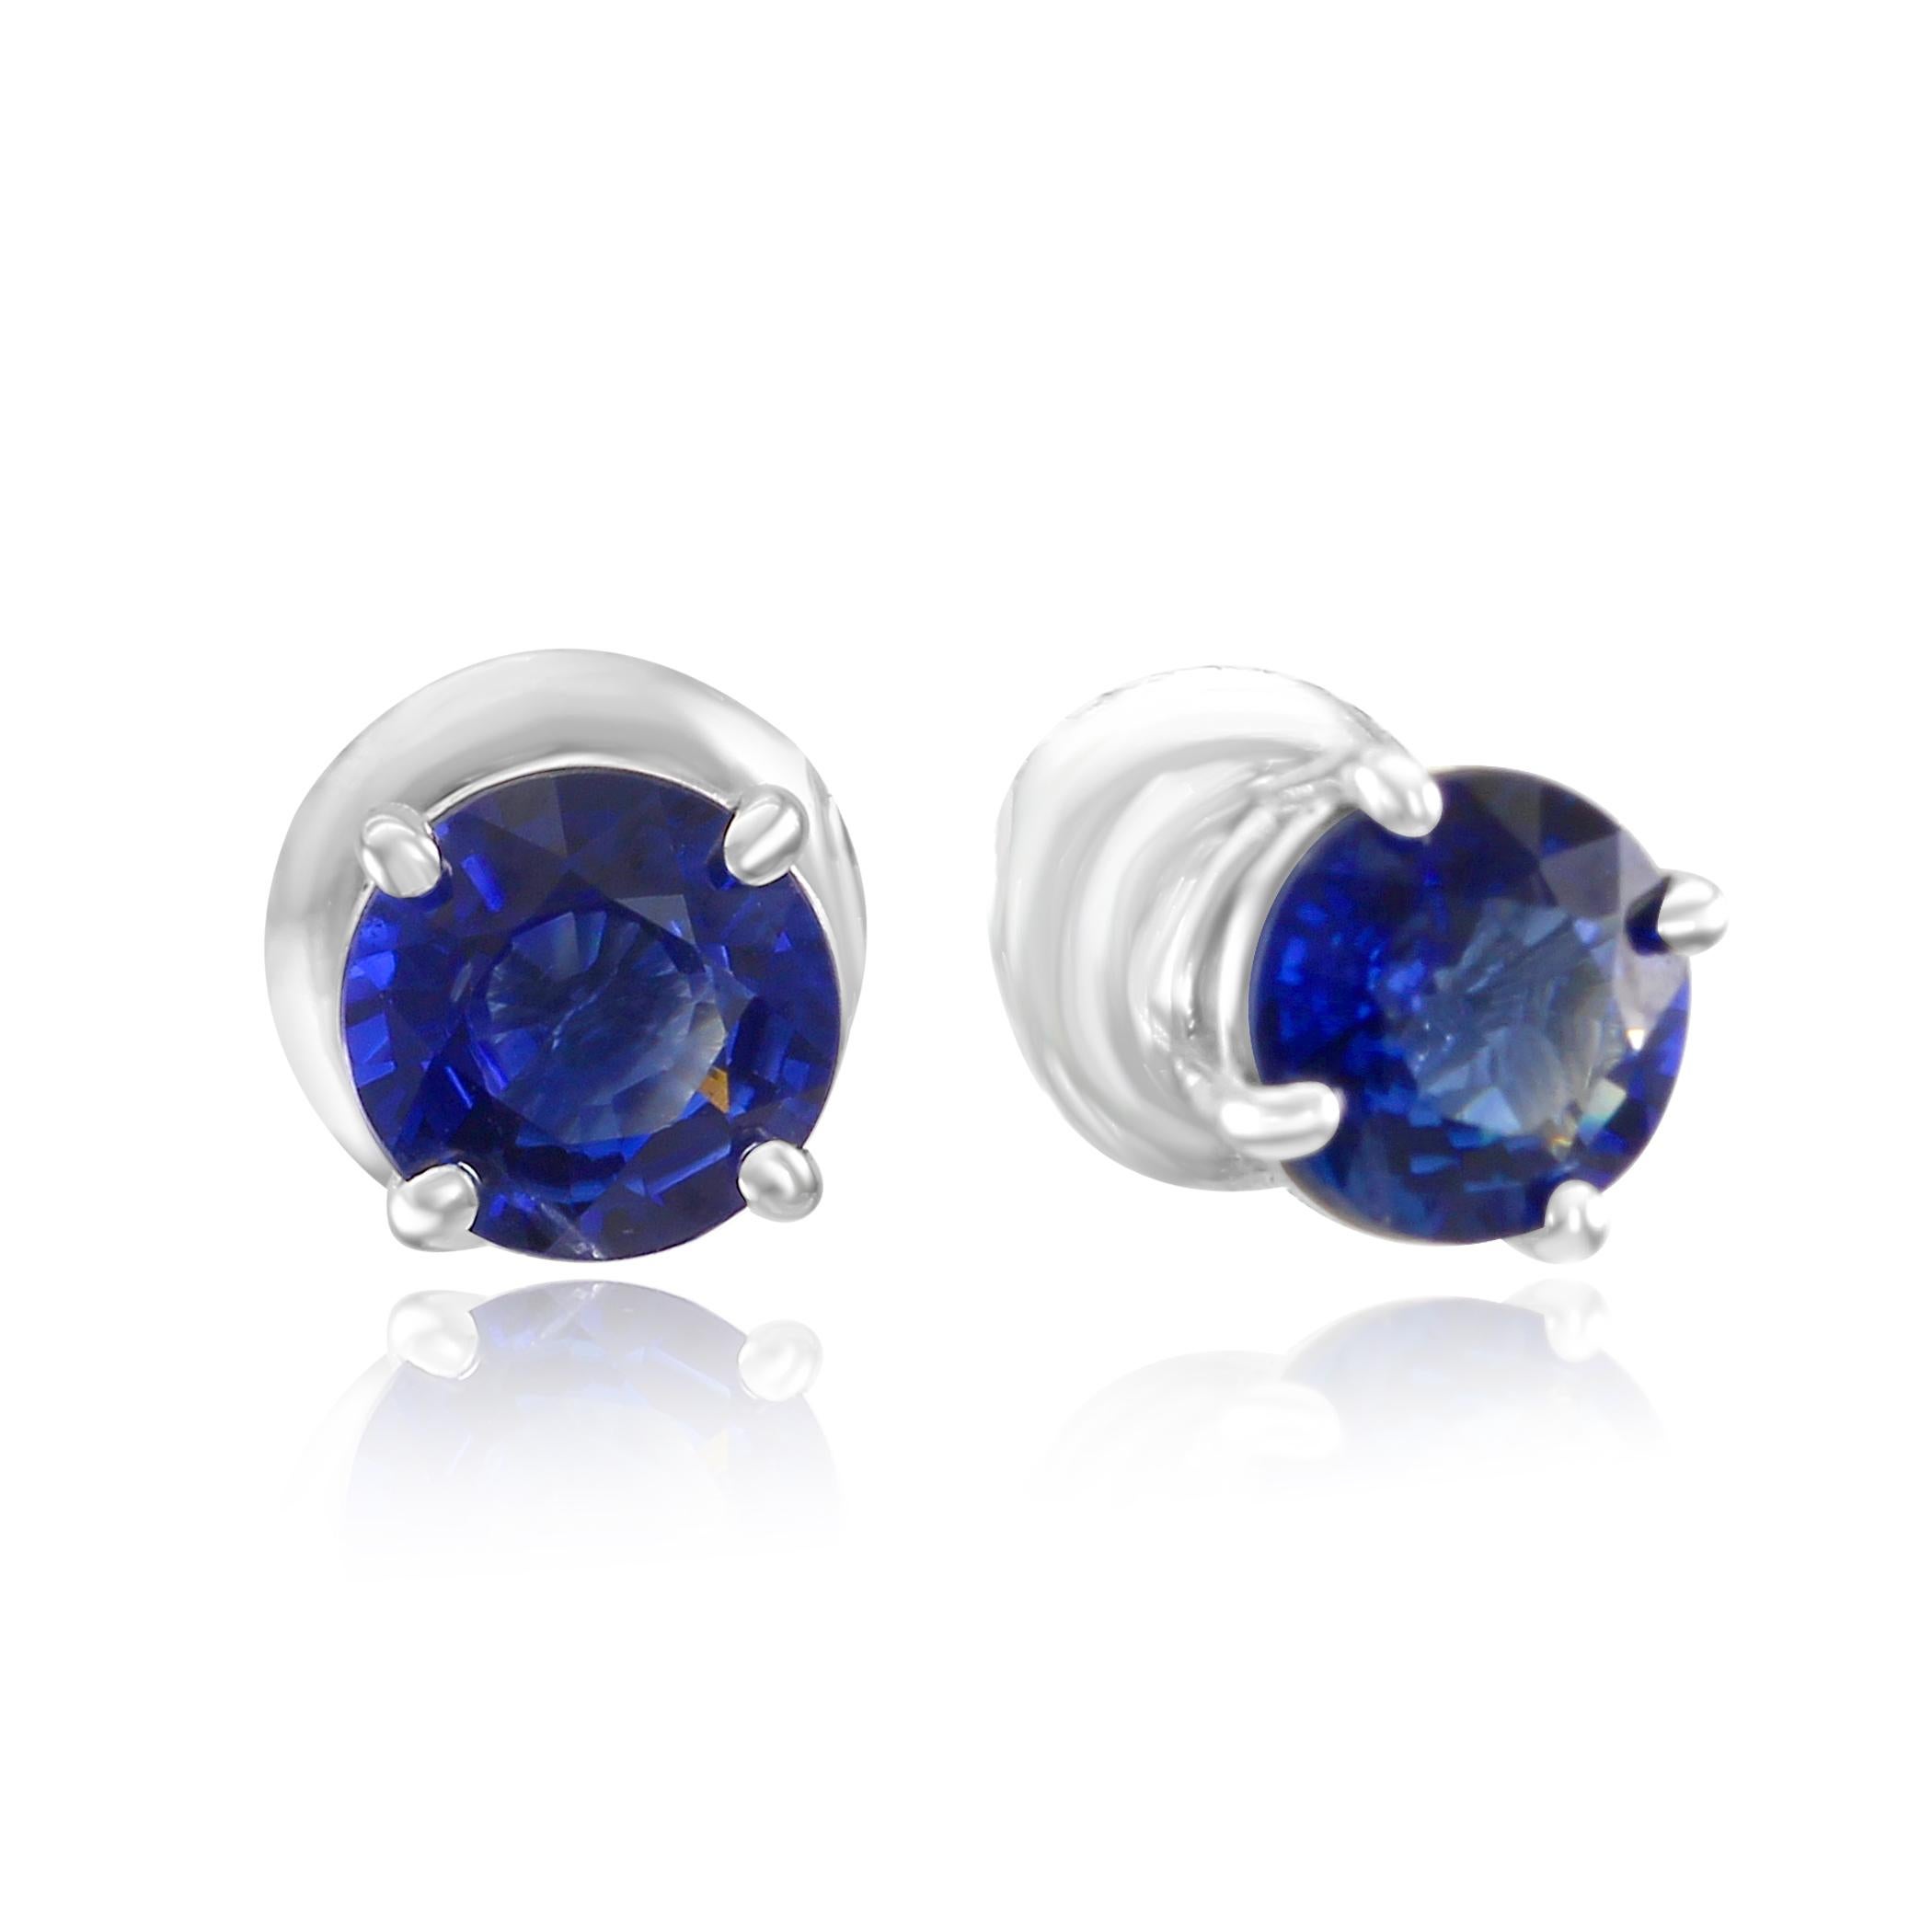 2 Fine Quality Blue Sapphire Round 1.54 Carat Total Weight set in Gorgeous Classic 4 Prong 14K White Gold Stud Earring.

MADE IN USA
Total Blue Sapphire Weight 1.54 Carat

Style available in different price ranges and with different center stones in